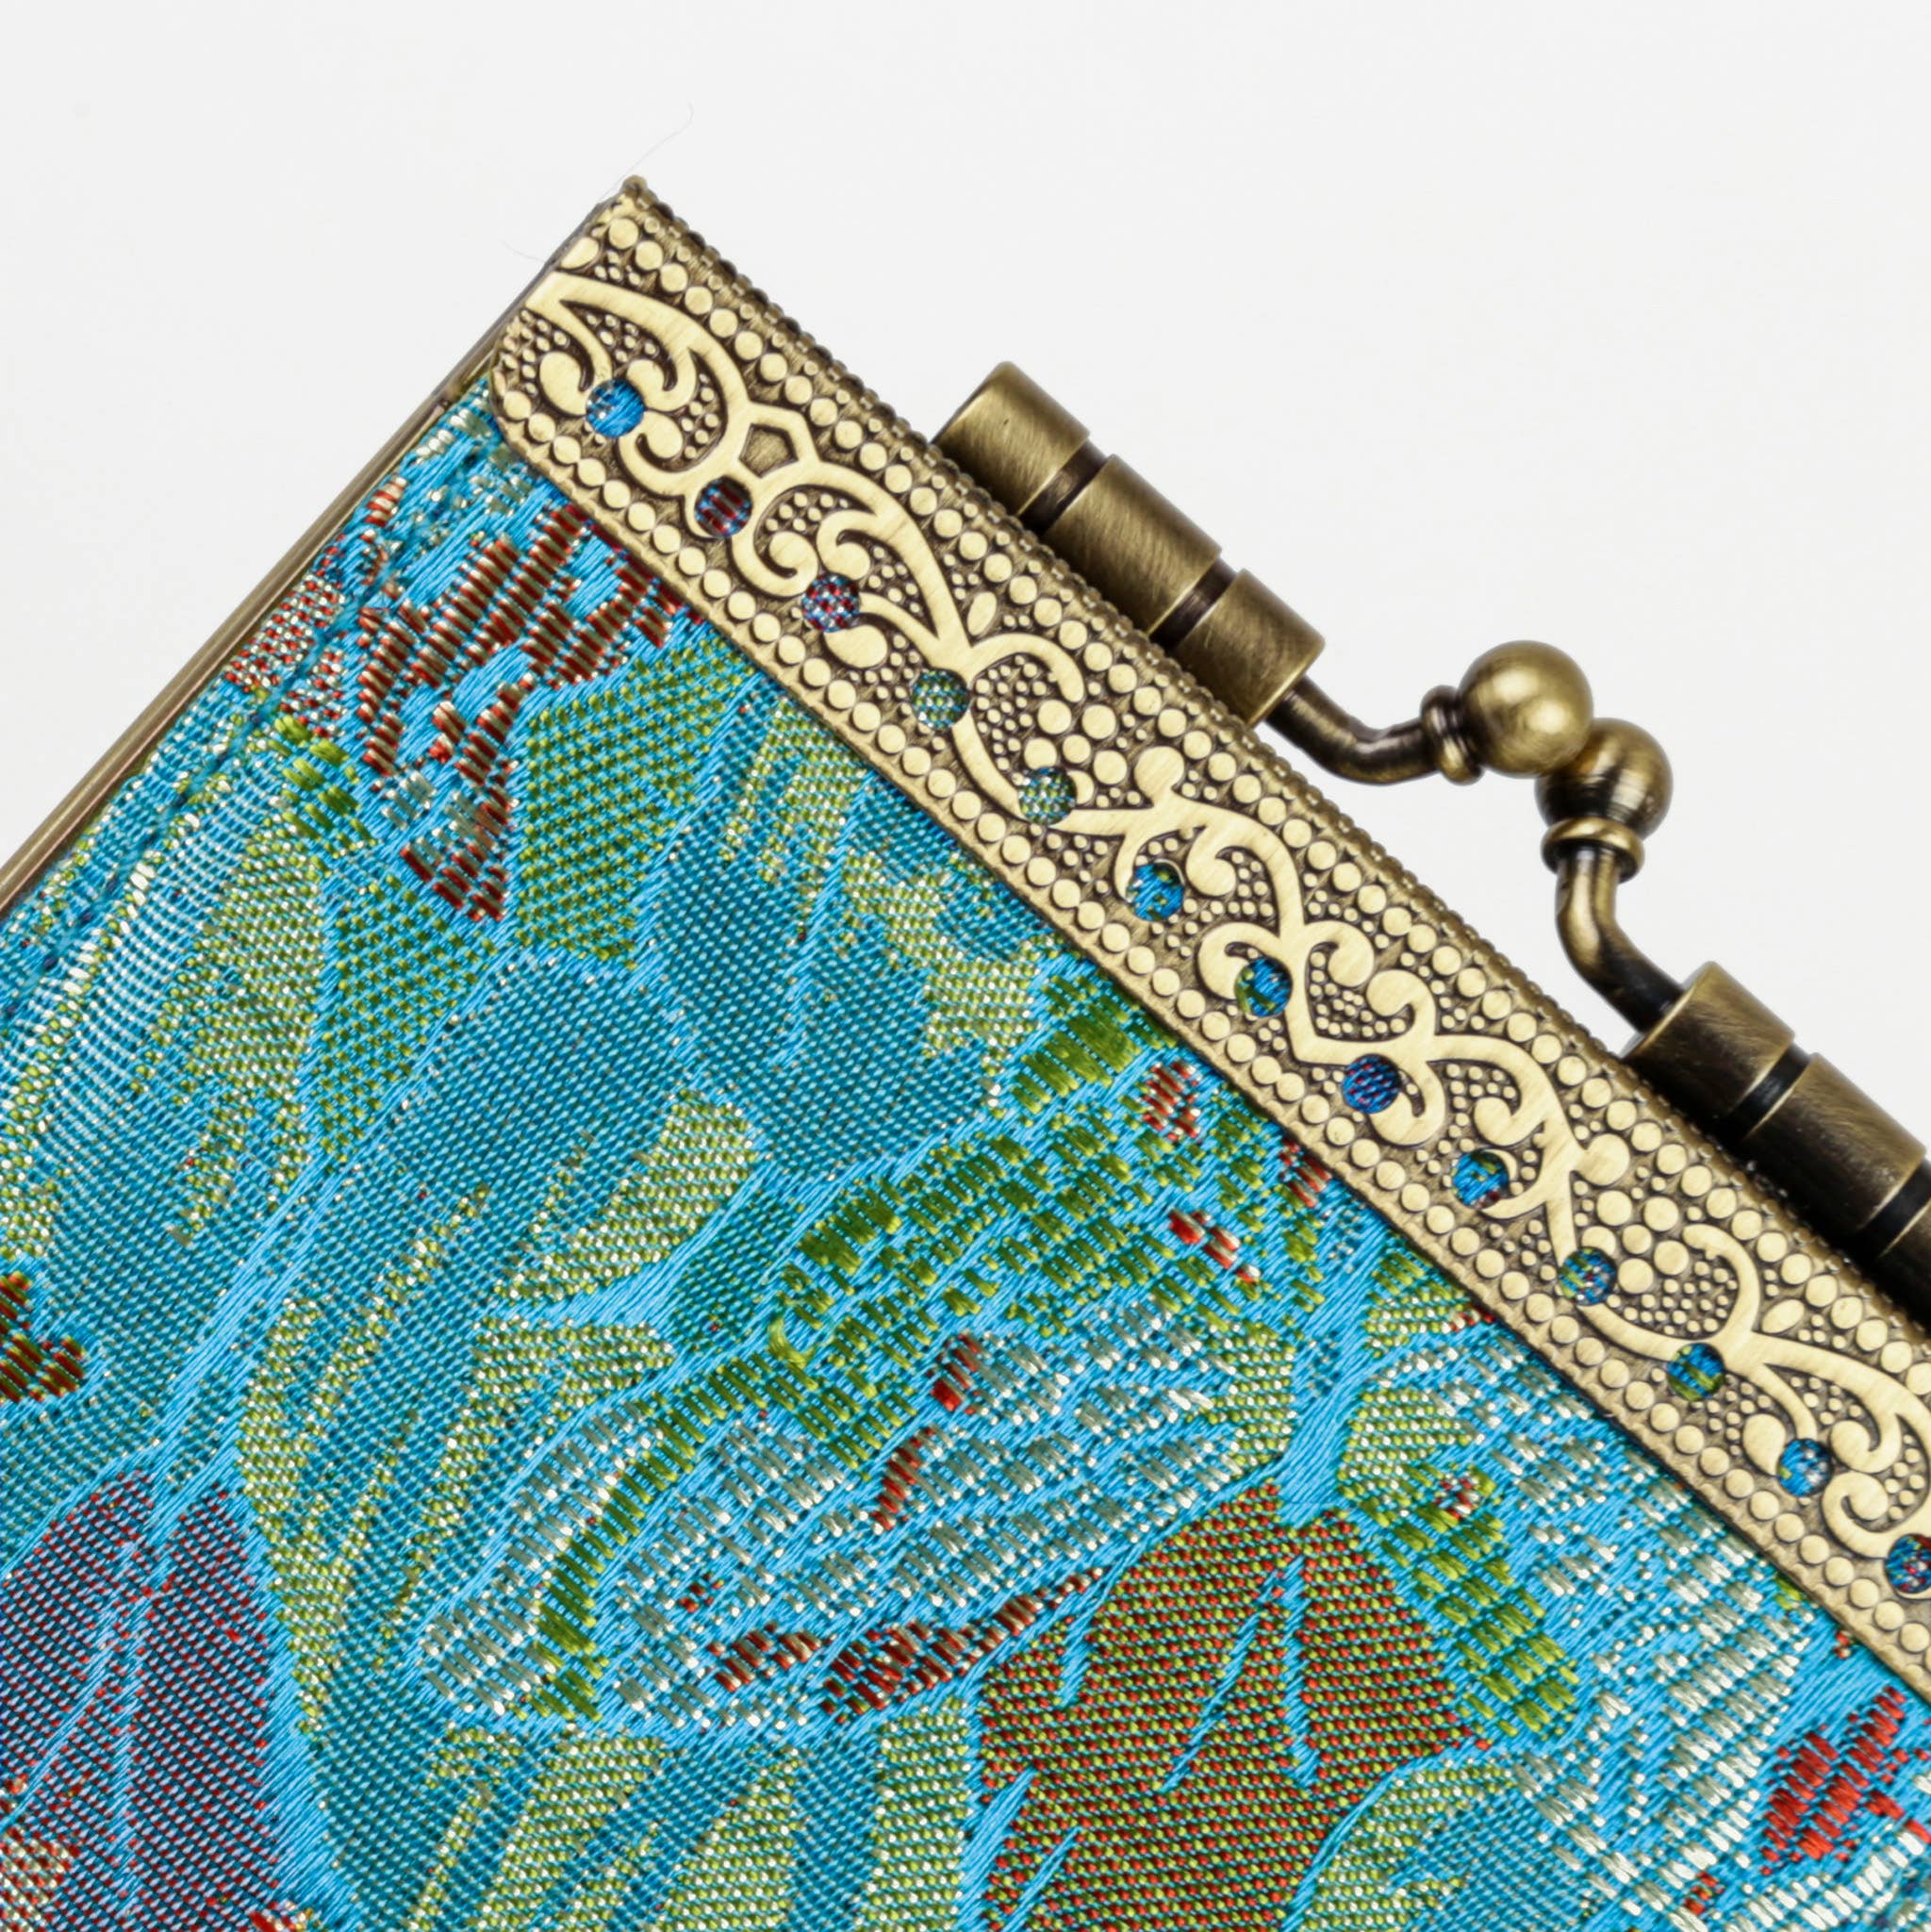 Floral Brocade Card Holder with RFID, Business Card Case: Sky Blue & Pink - Out of the Blue